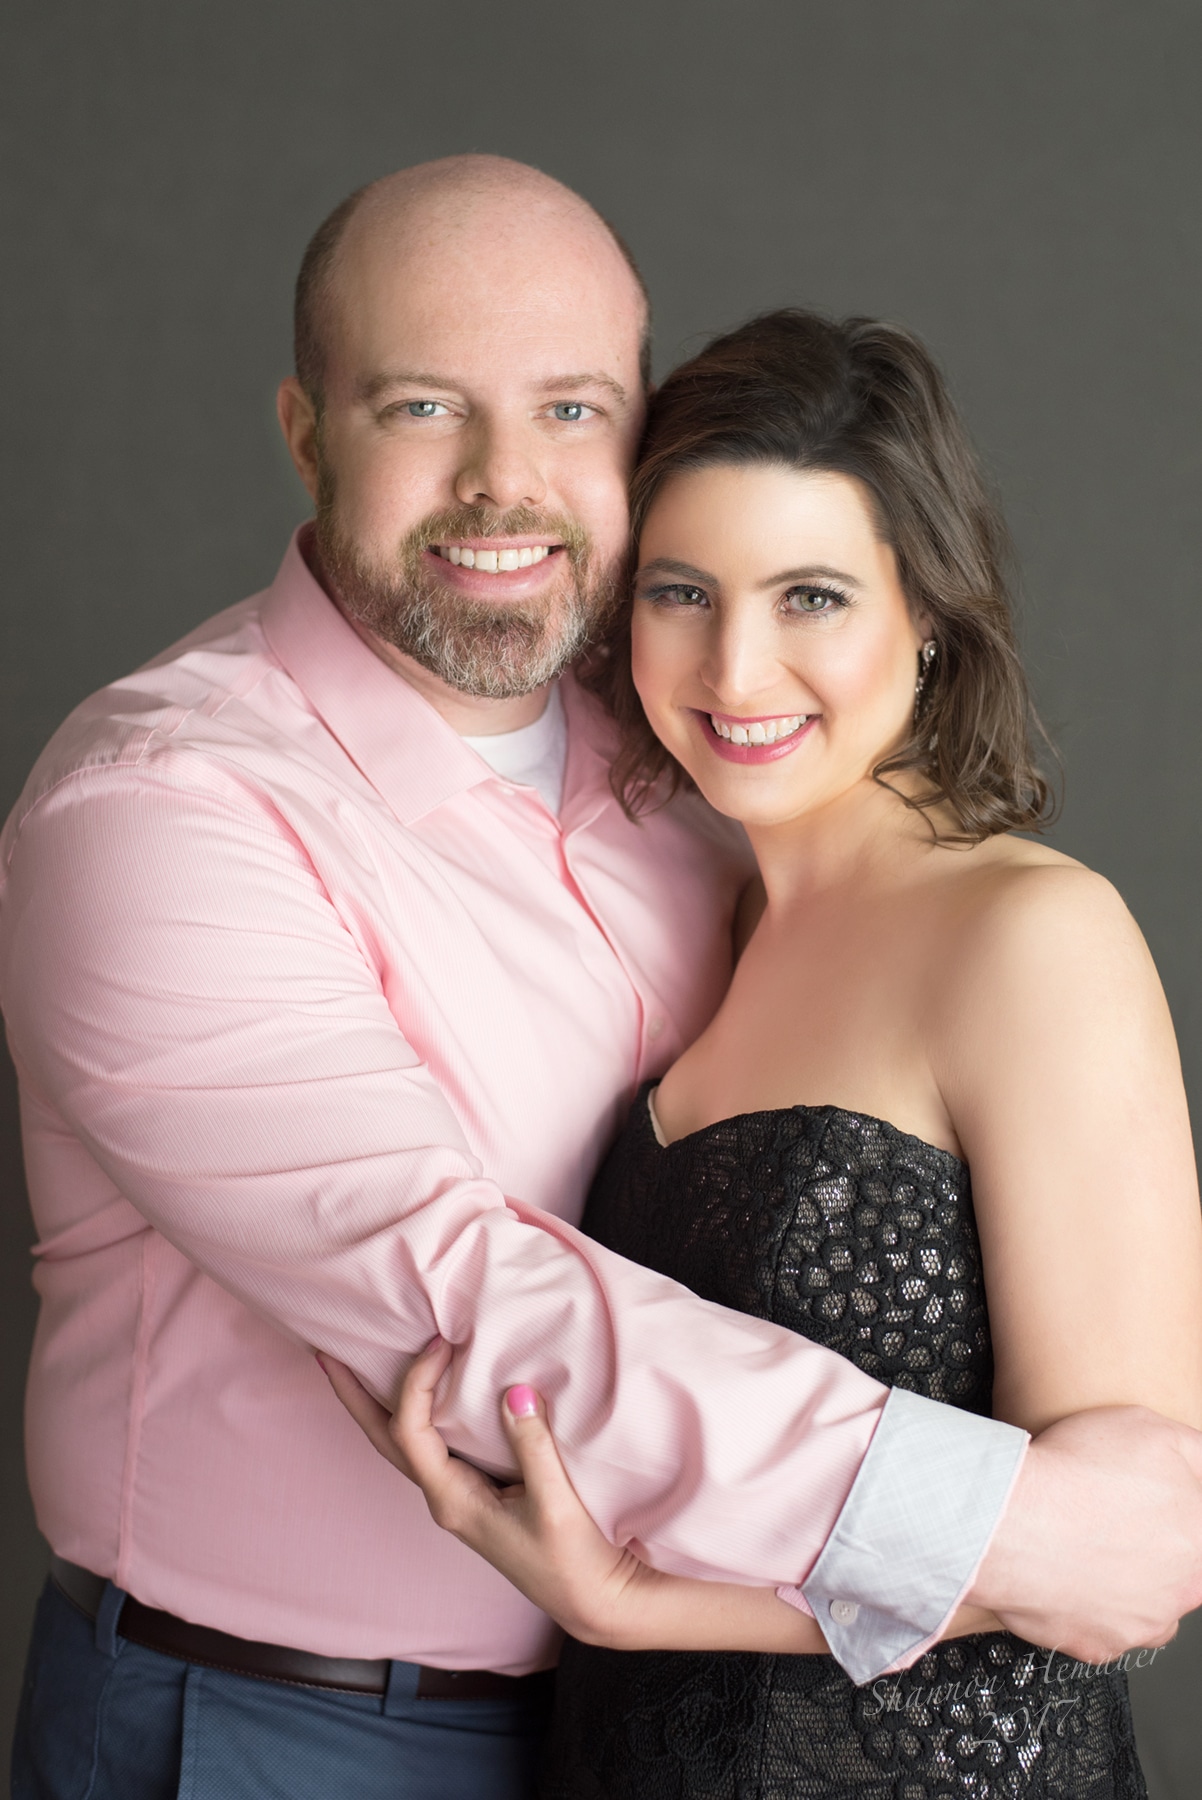 Couple's contemporary glamour portrait photography Harrisburg PA Shannon Hemauer Photography